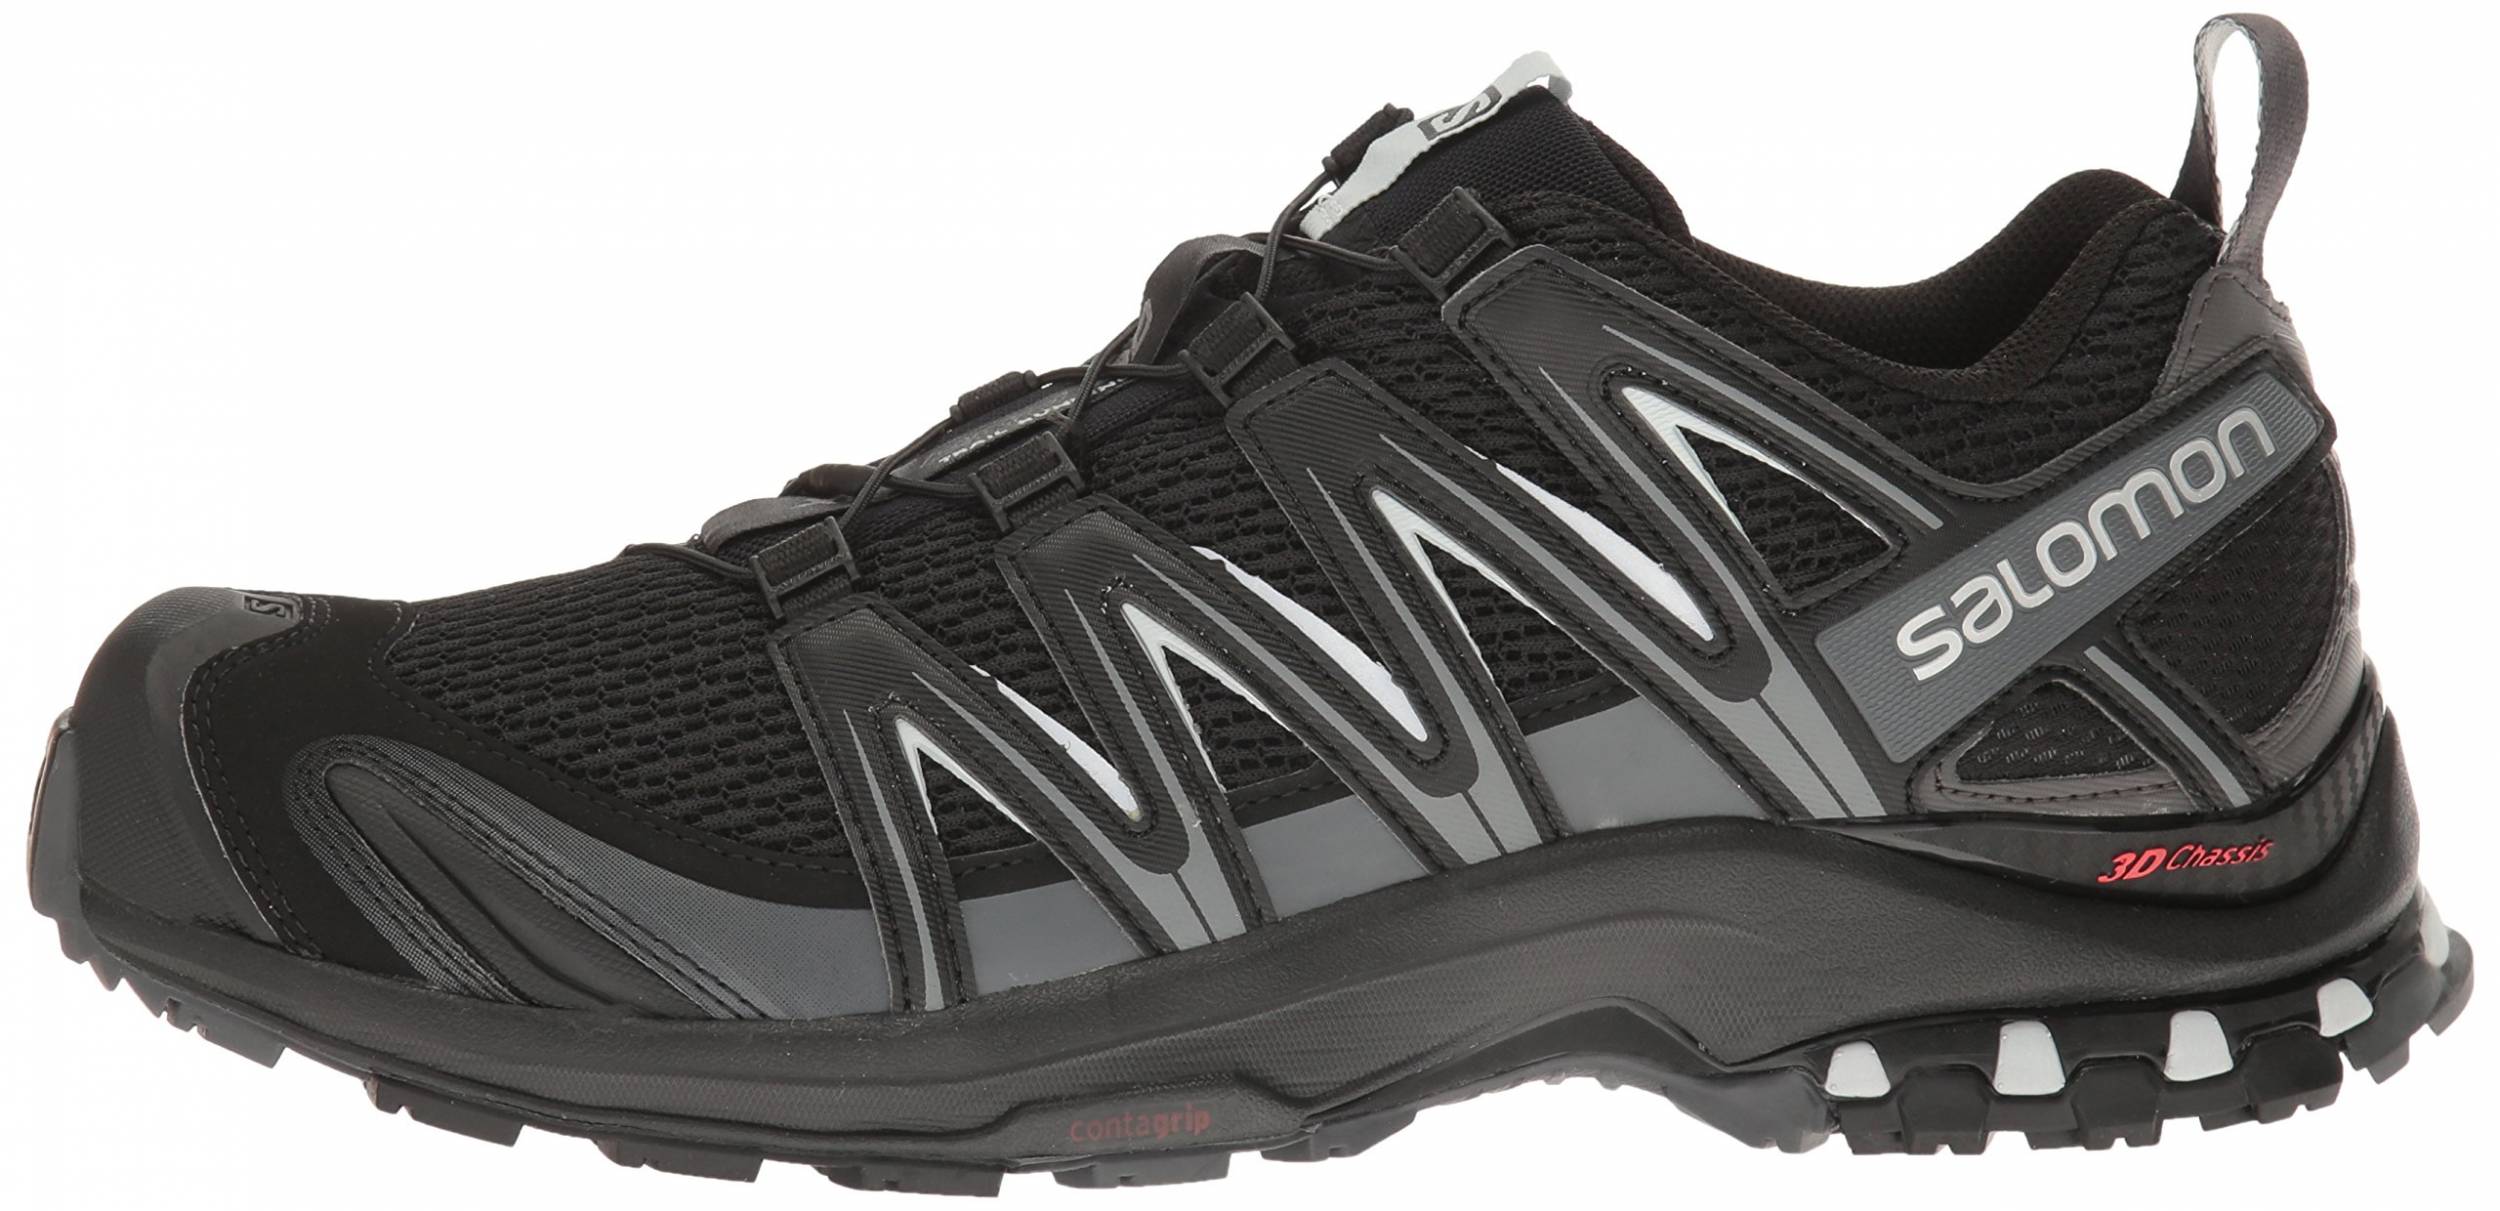 stable trail running shoes